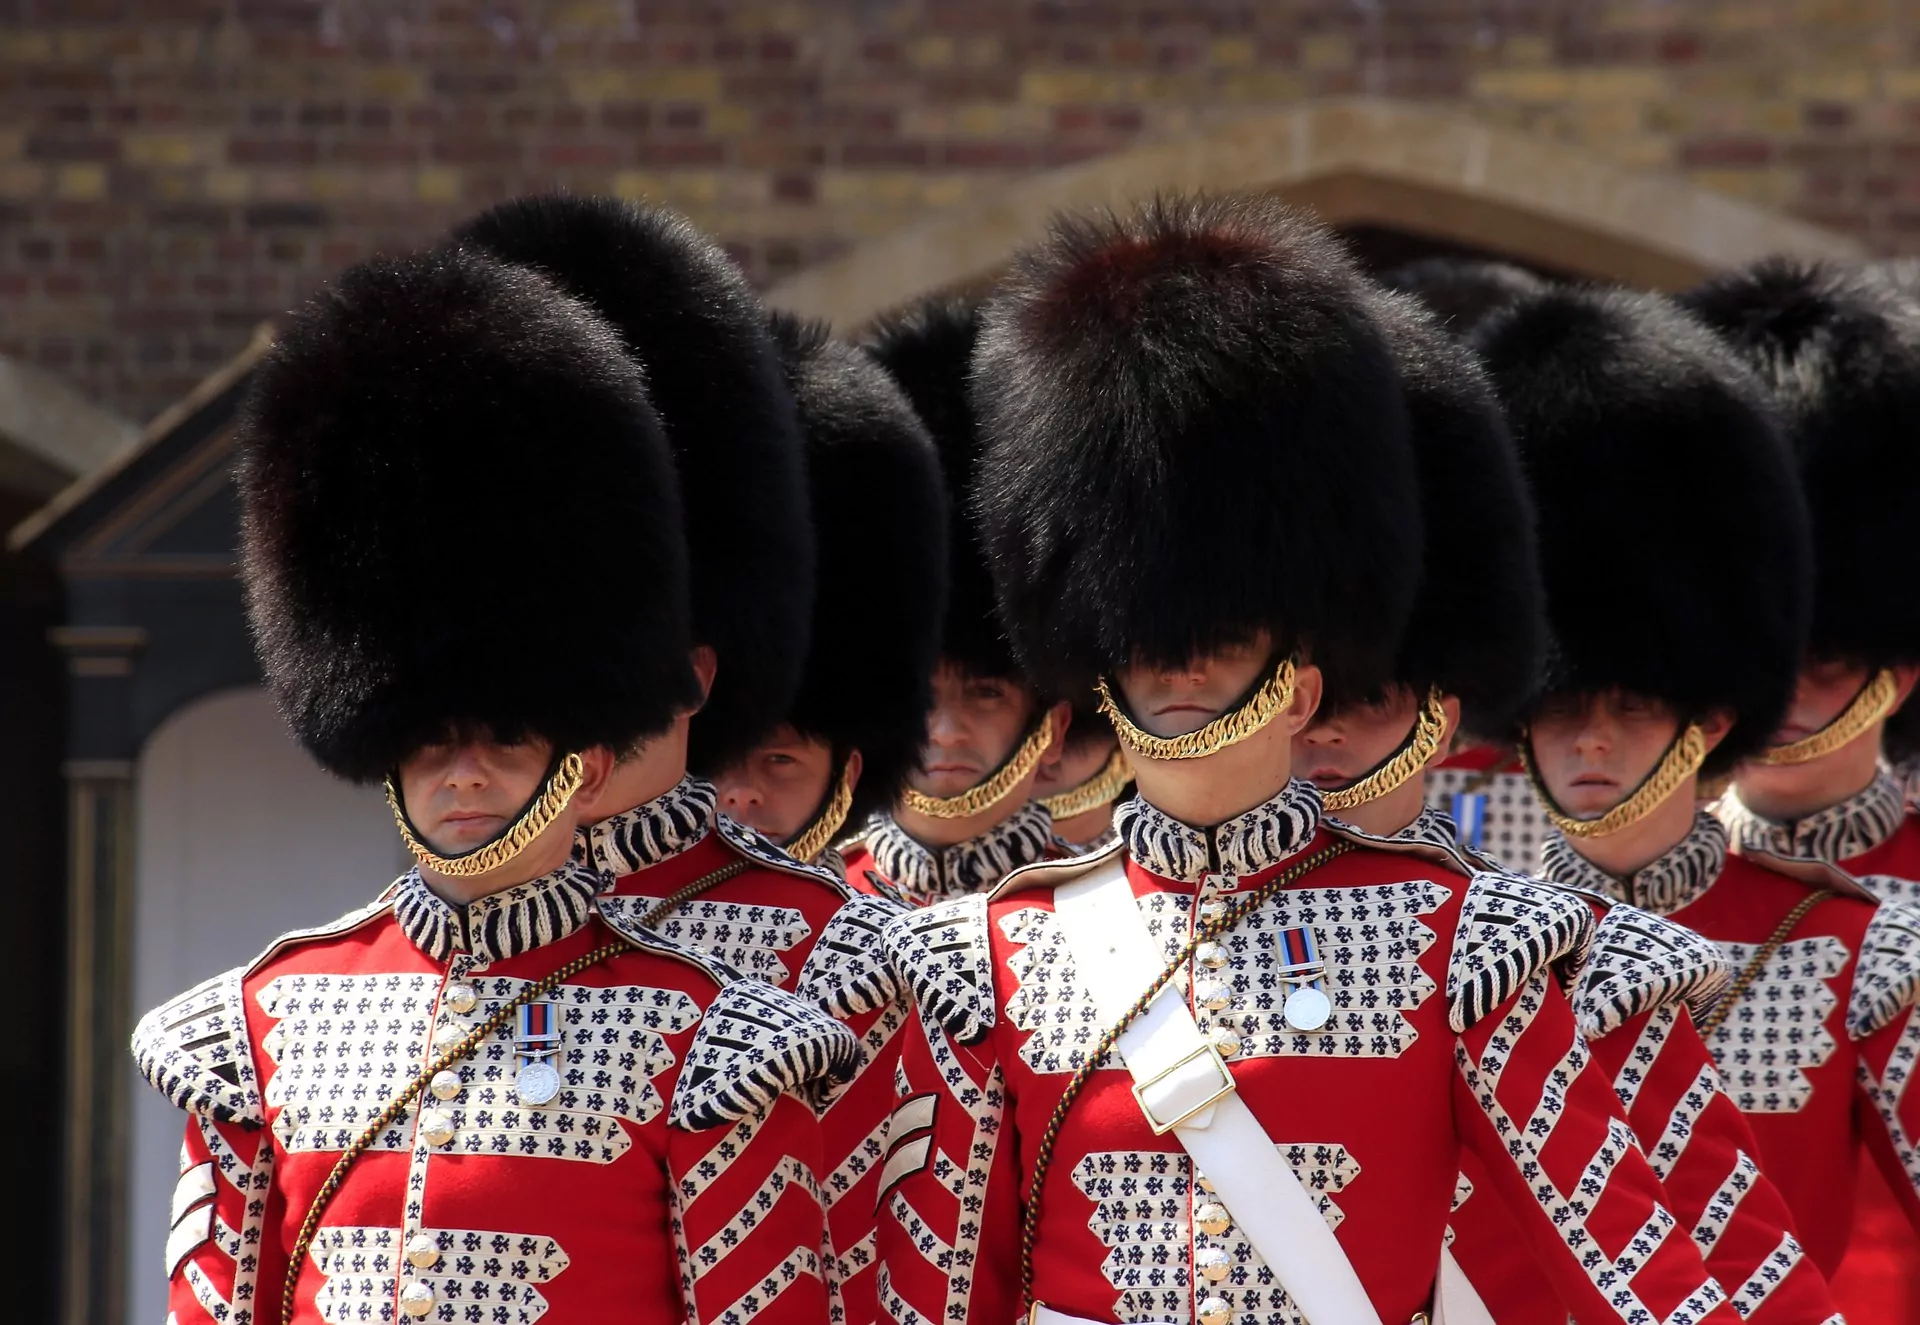 Royal Guards march at Buckingham Palace, London. Our article discusses time-lapse footage of nationwide celebrations of King Charles III's coronation.